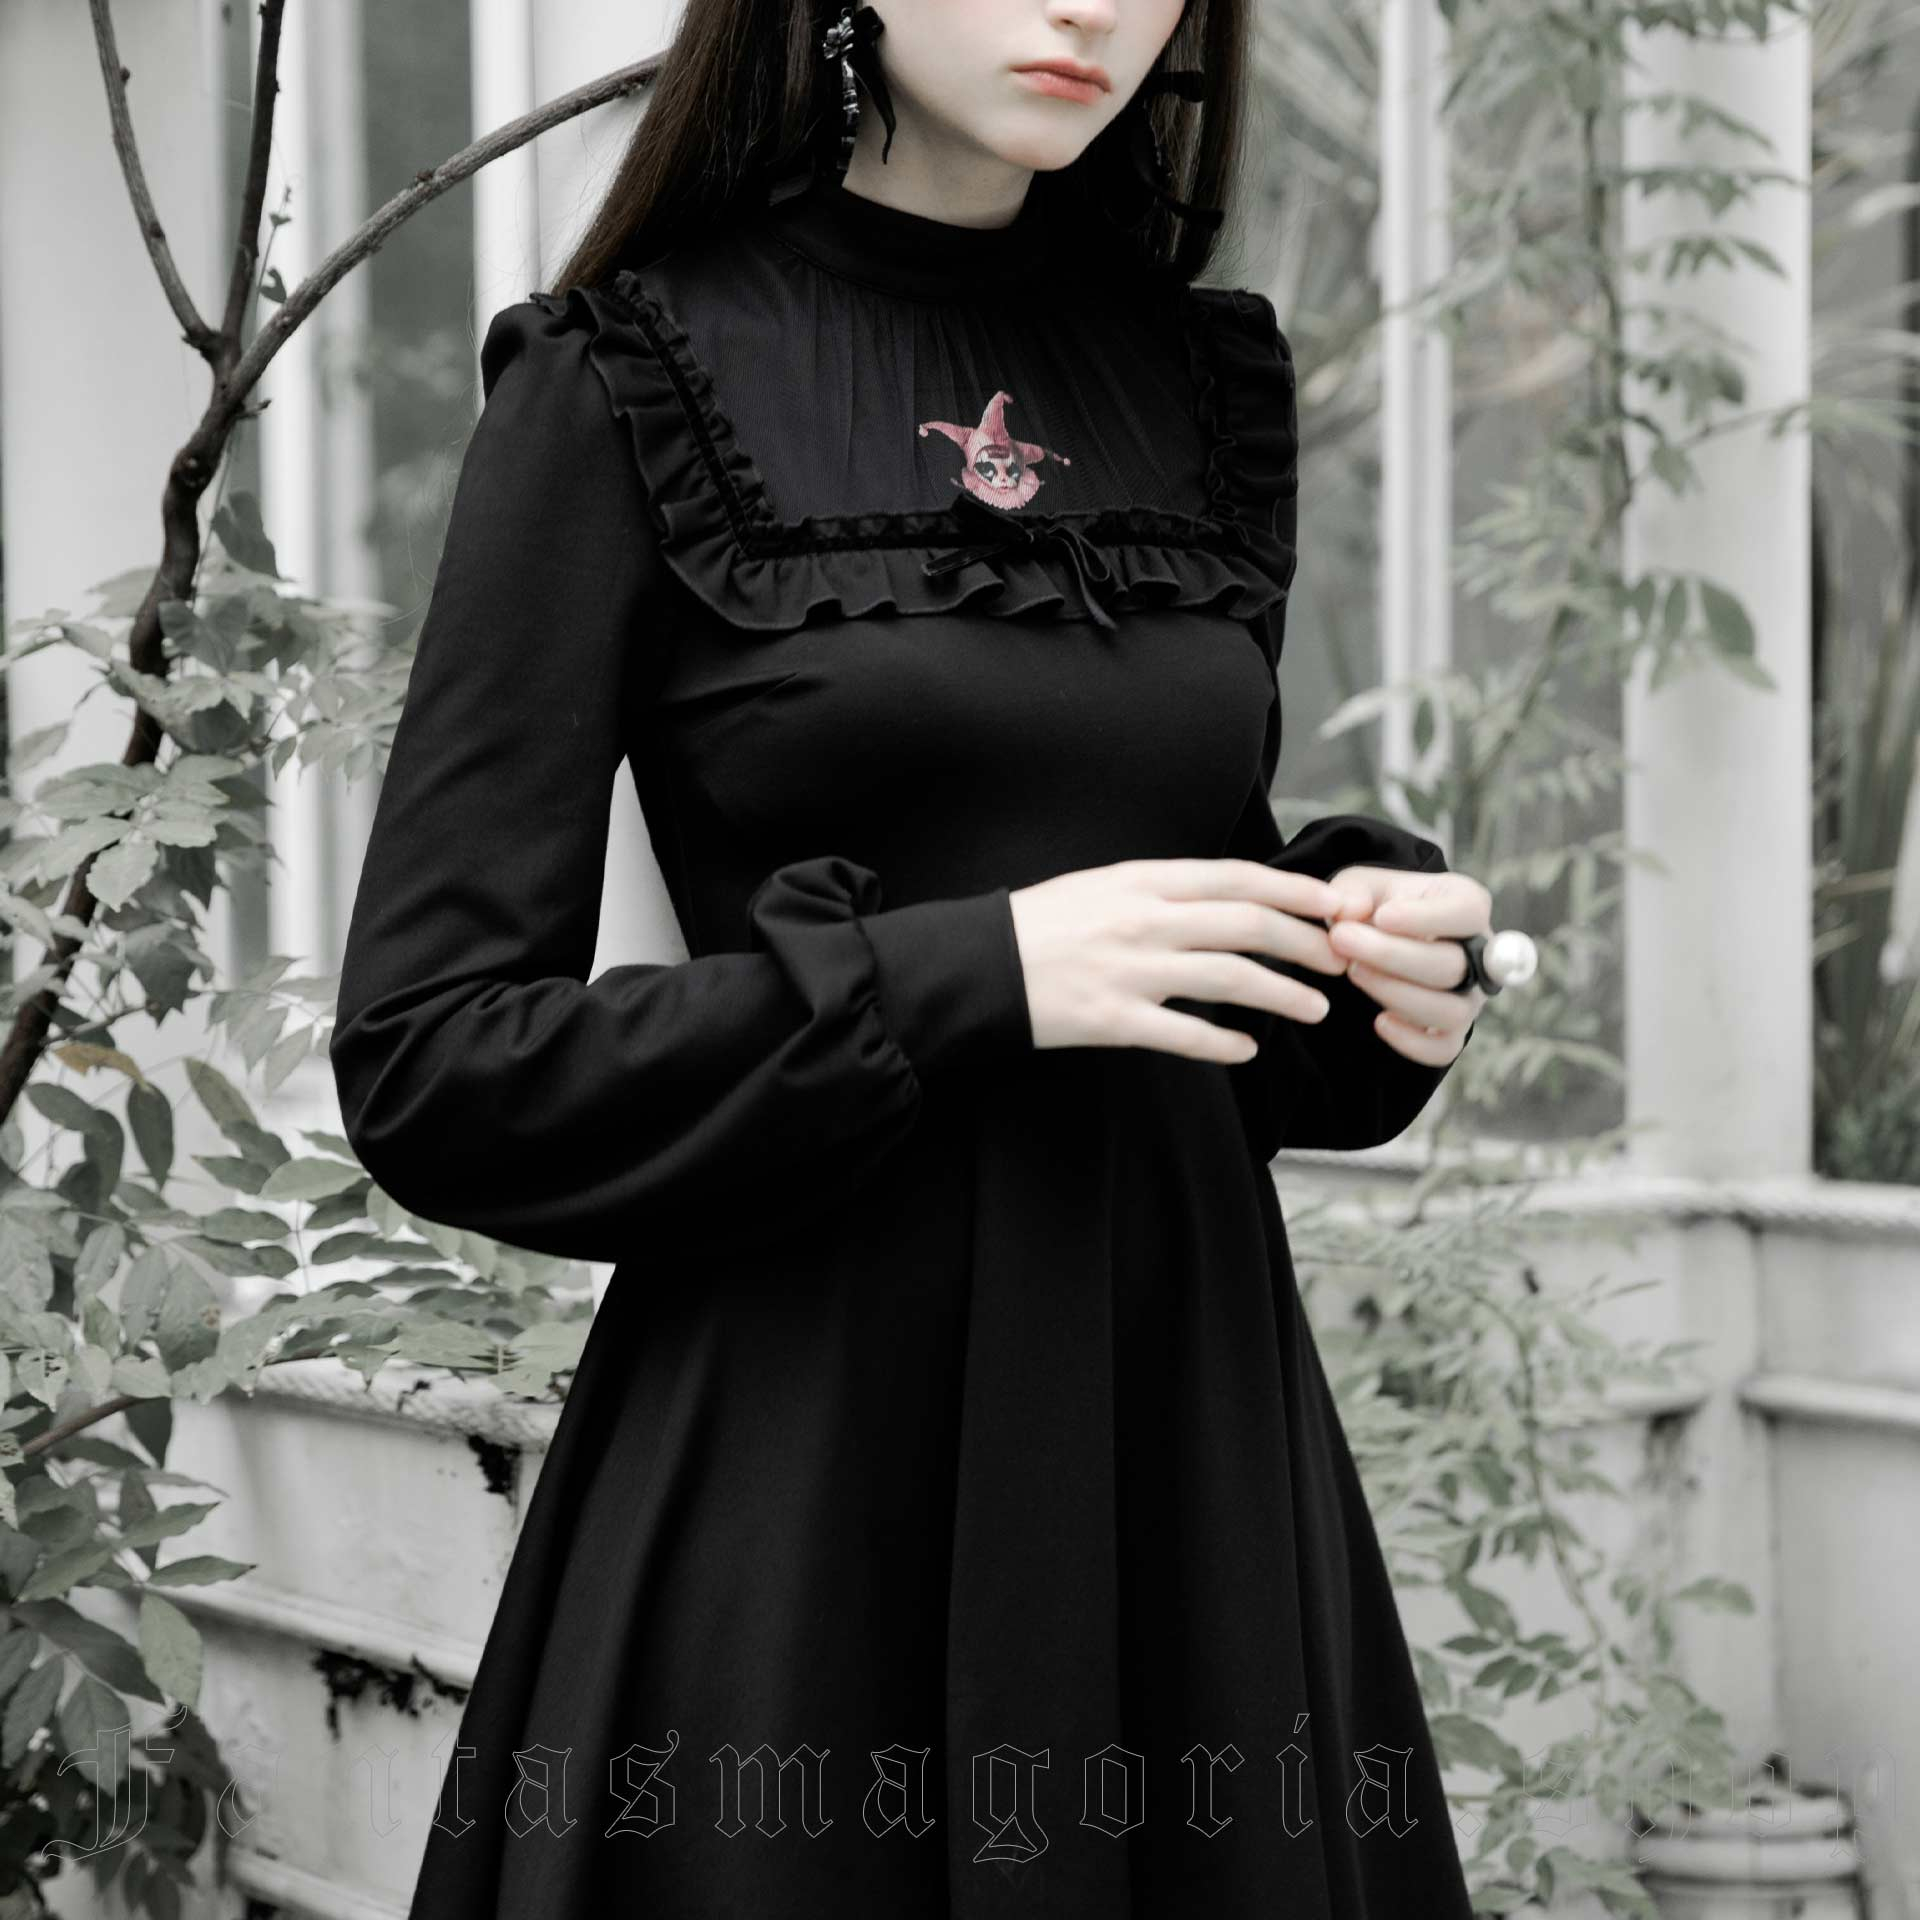 Weaponized Spiked Black Cotton Gothic JSK Dress — Gloomth